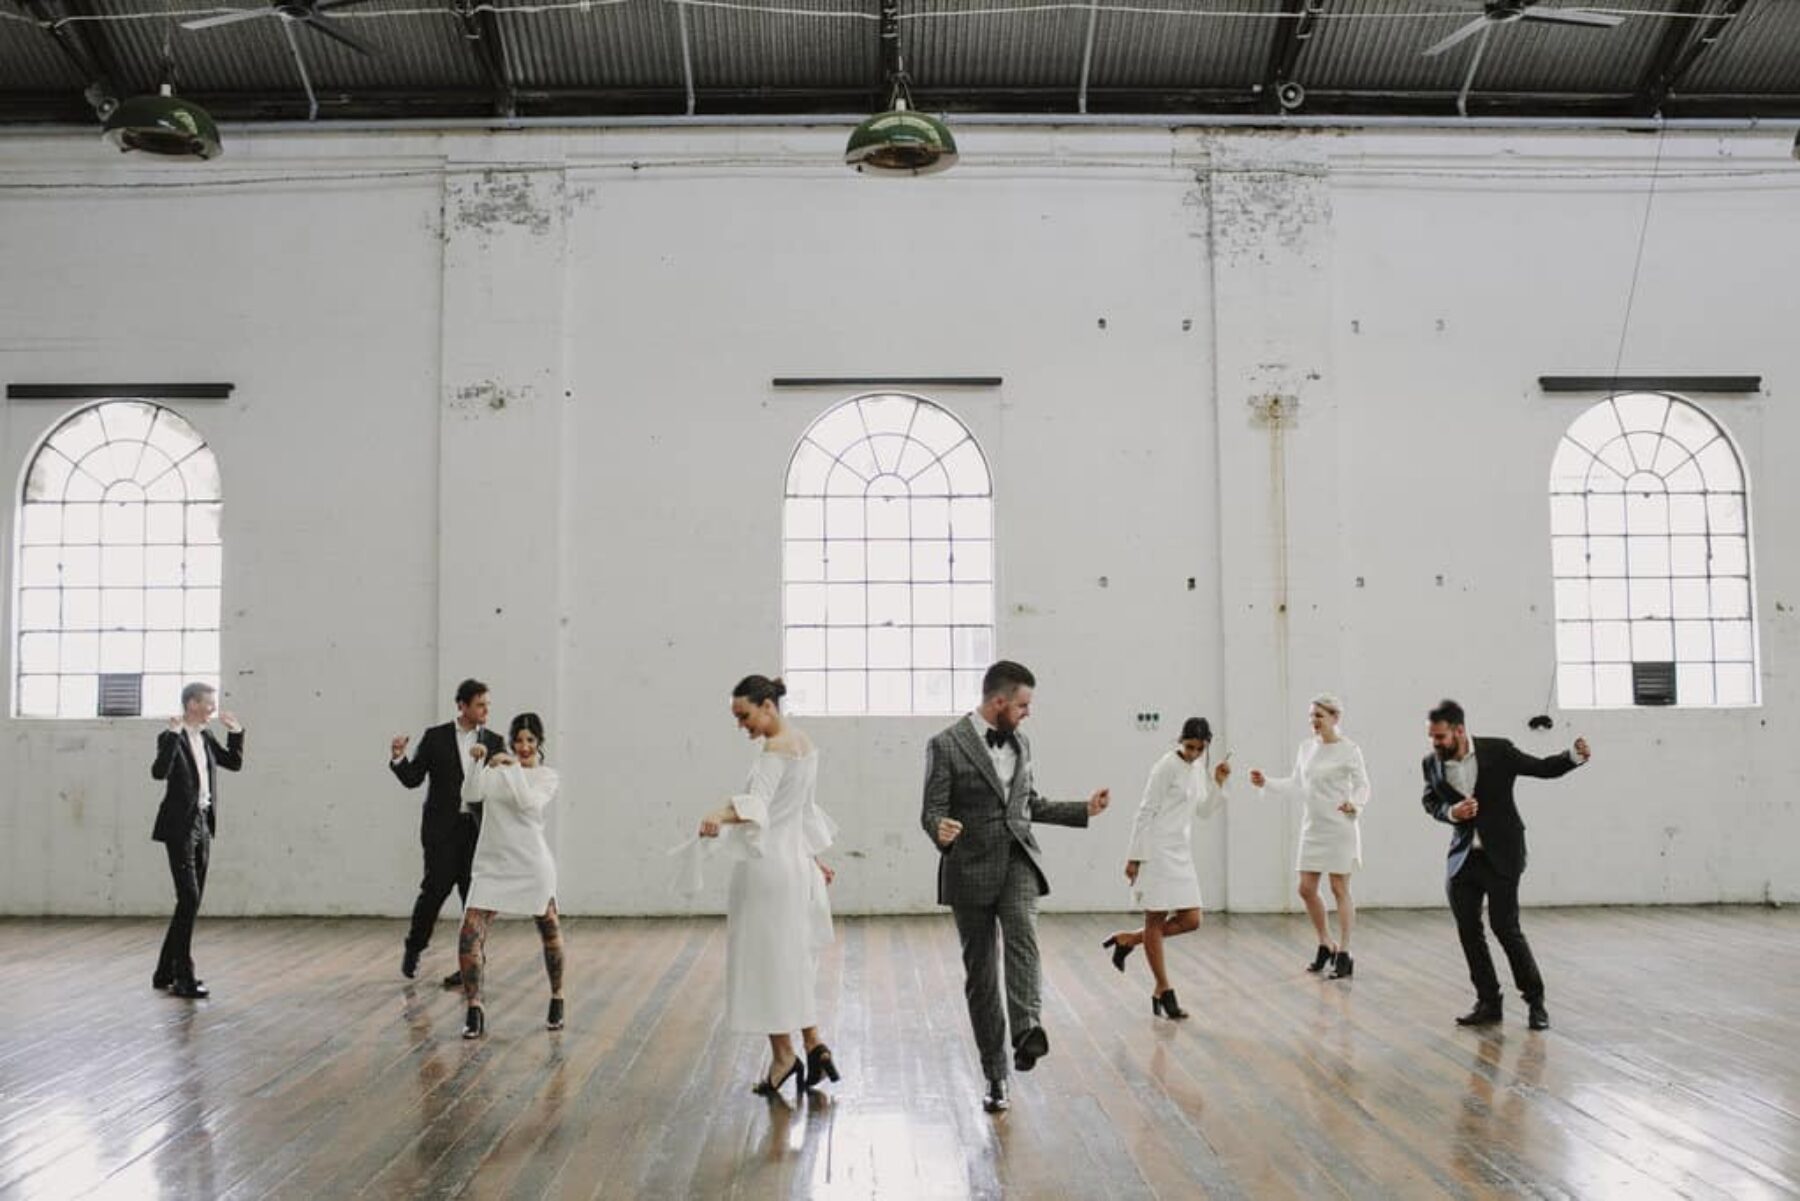 Industrial Sydney wedding at Carriageworks - Photography by Justin Aaron